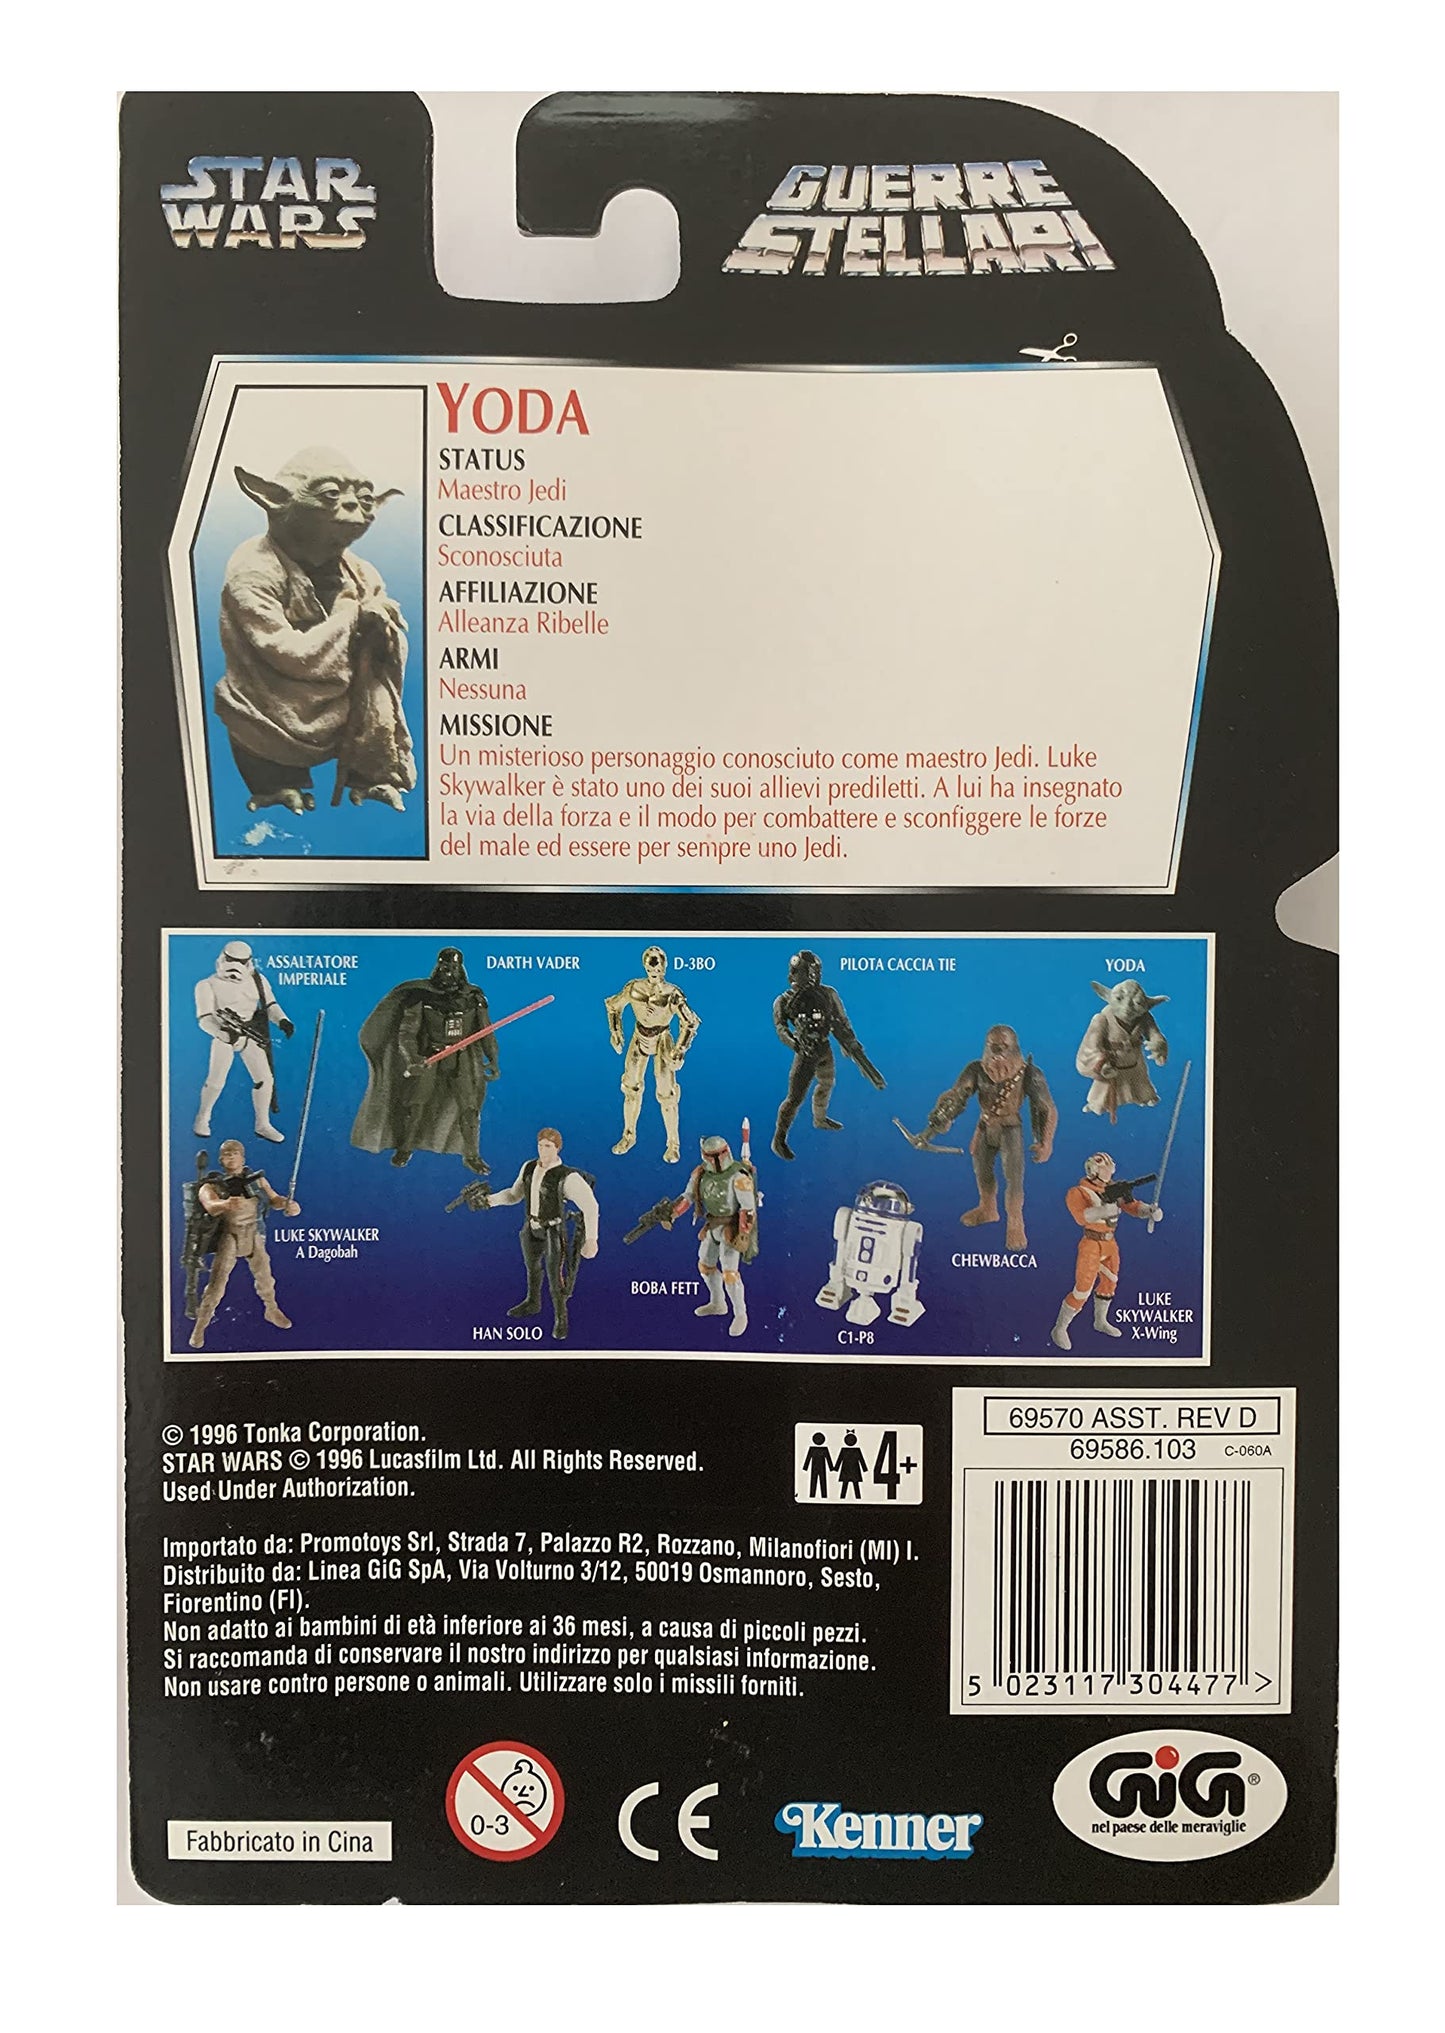 Vintage Kenner 1996 Star Wars Power of the Force - Jedi Master Yoda Action Figure - Red Foreign Card - Shop Stock Room Find - Brand New Factory Sealed Shop Stock Room Find